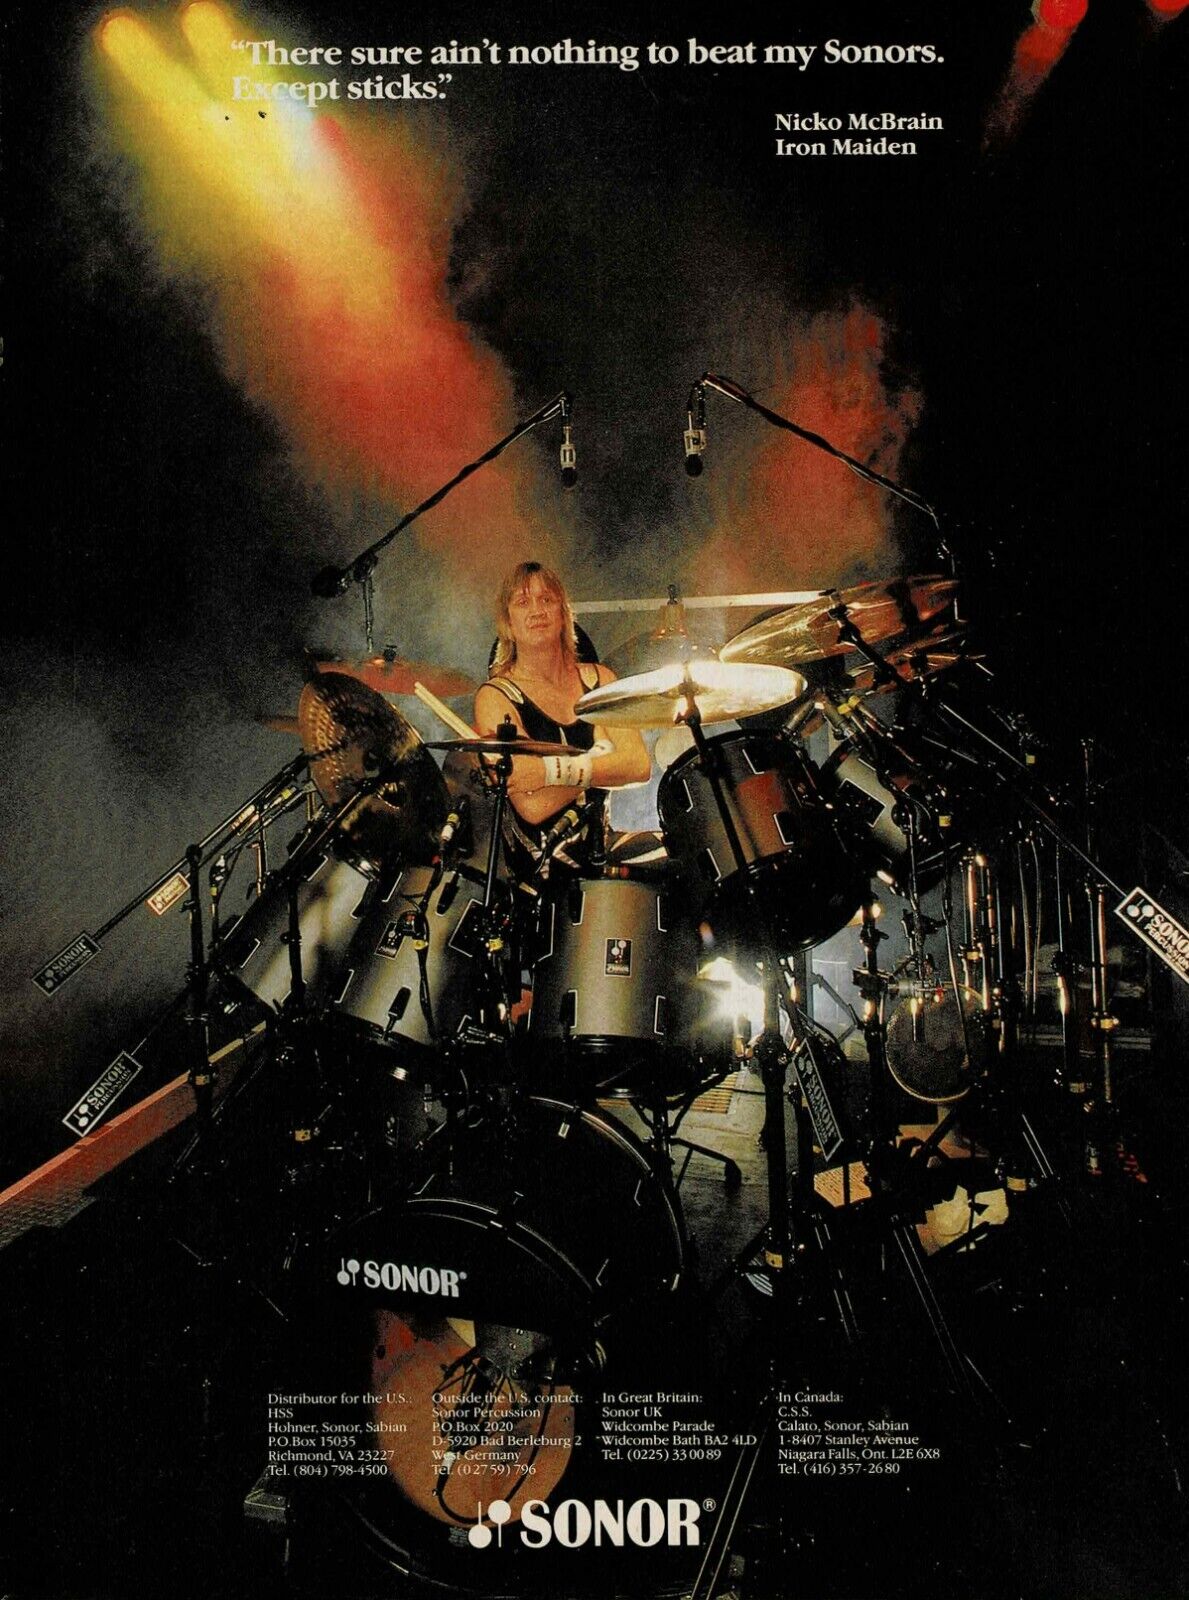 SONOR DRUMS - Nicko McBrain of Iron Maiden - 1987 Print Ad